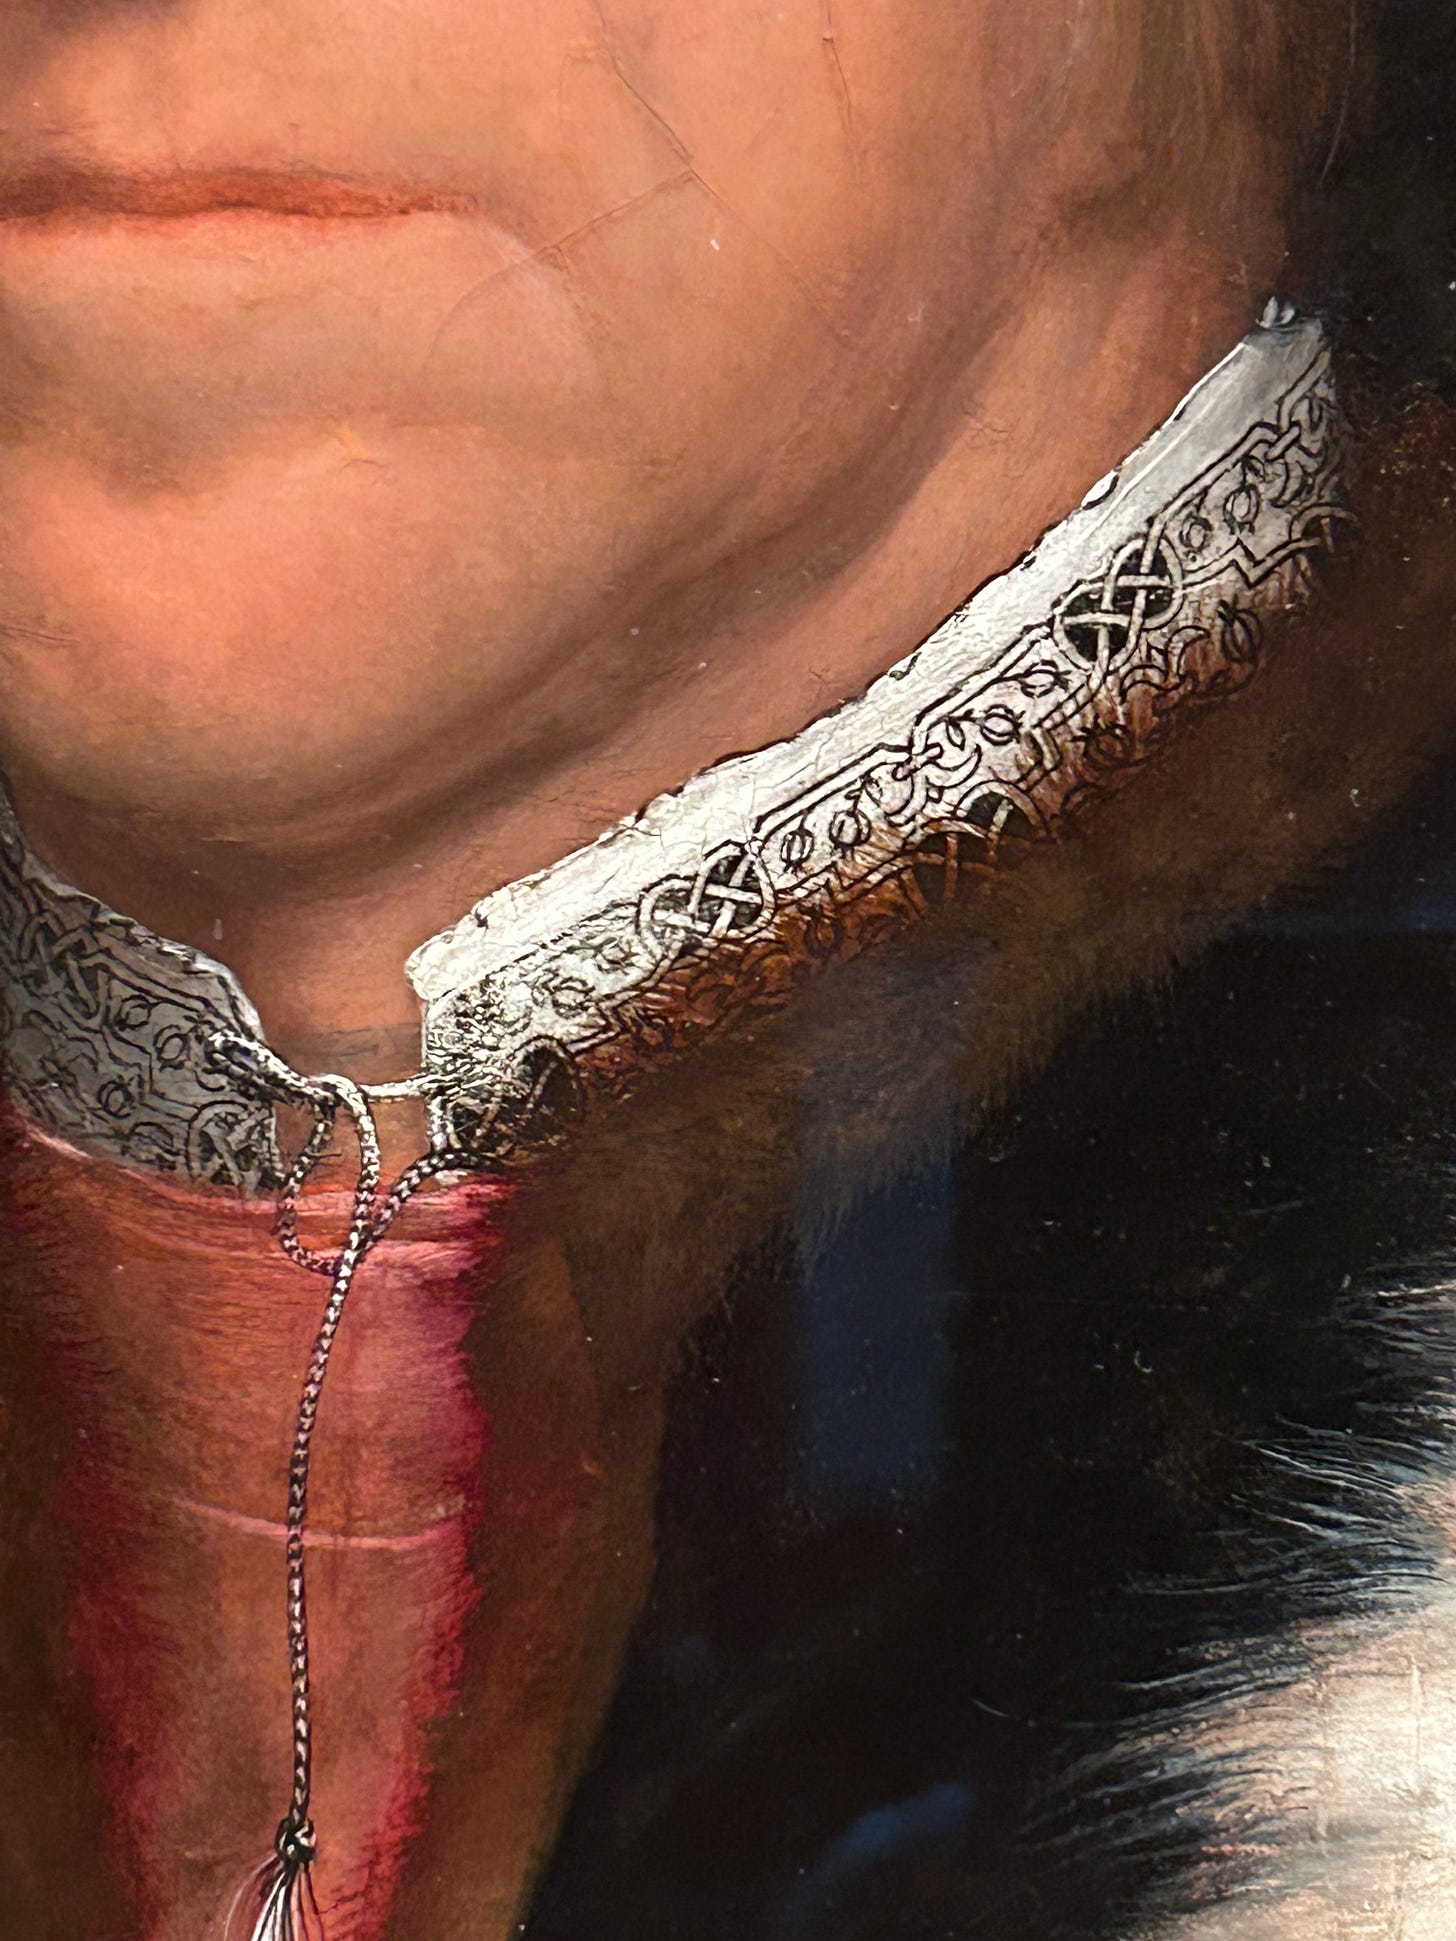 A close up of the portrait of the Duke of Norfolk highlighting his mouth and chin, his white collar embroidered with blackwork, and the brown fur collar of his coat